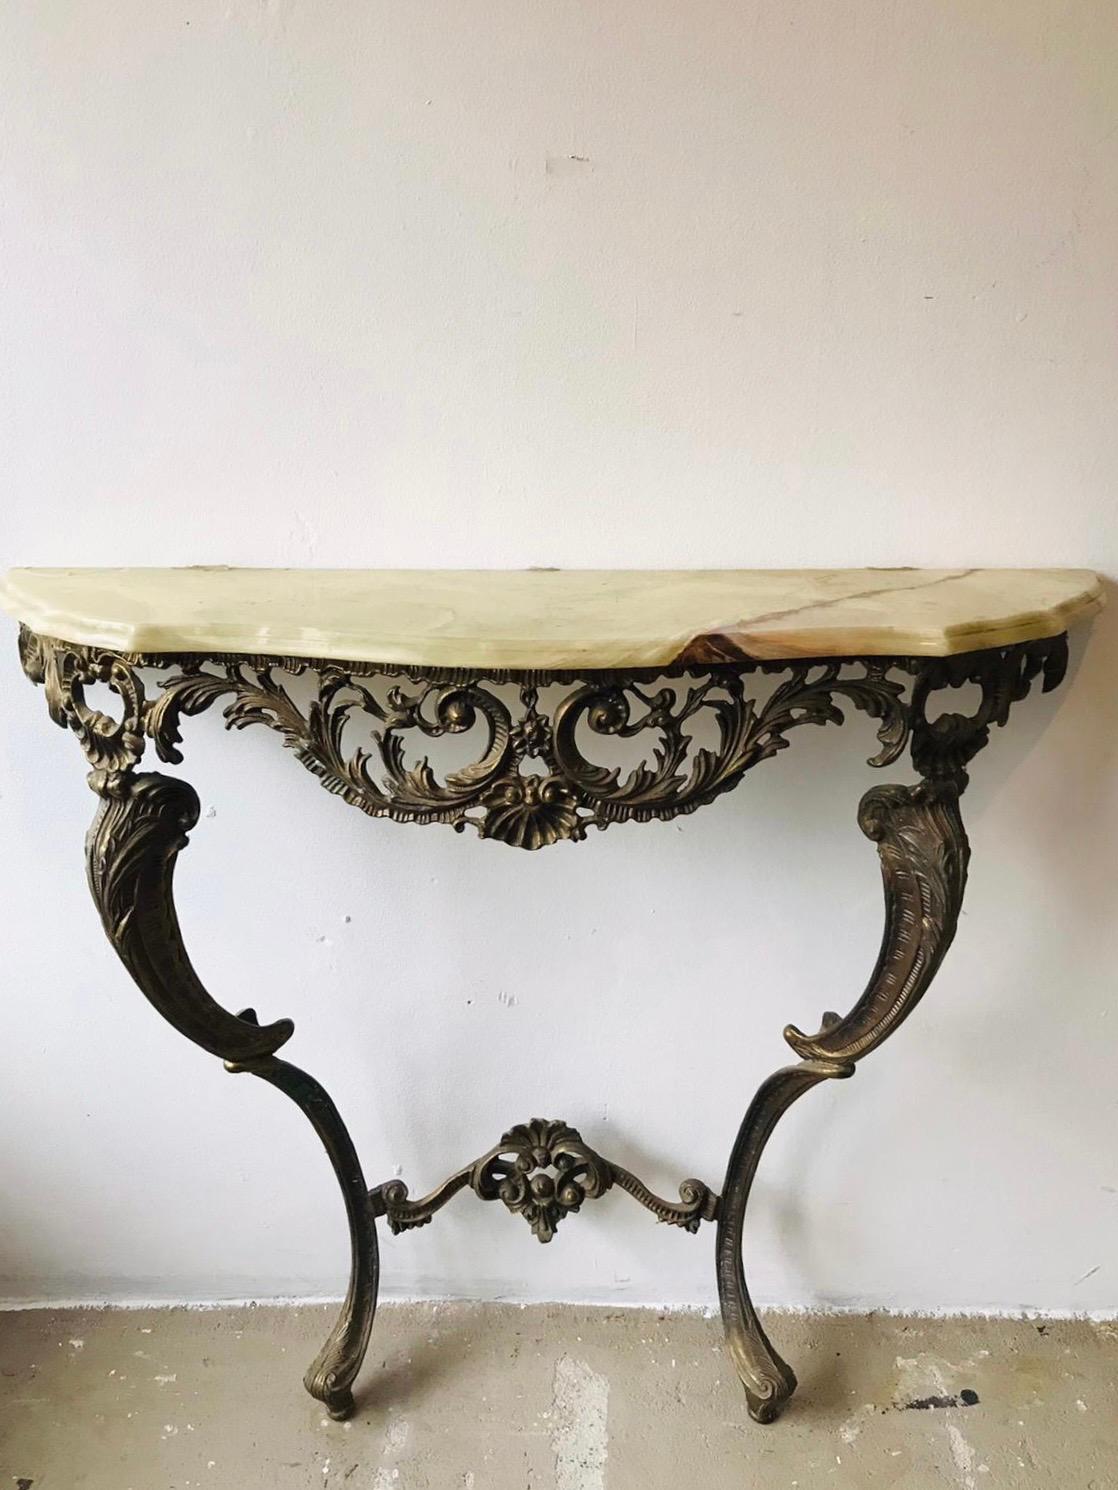 Beautifully shaped classical design piece; wall-mounted with carved cabriole legs with many decorative figures and a nicely veined and cut marble top. Ideal to be placed near your front door to leave your keys on, or anywhere else in the house. More